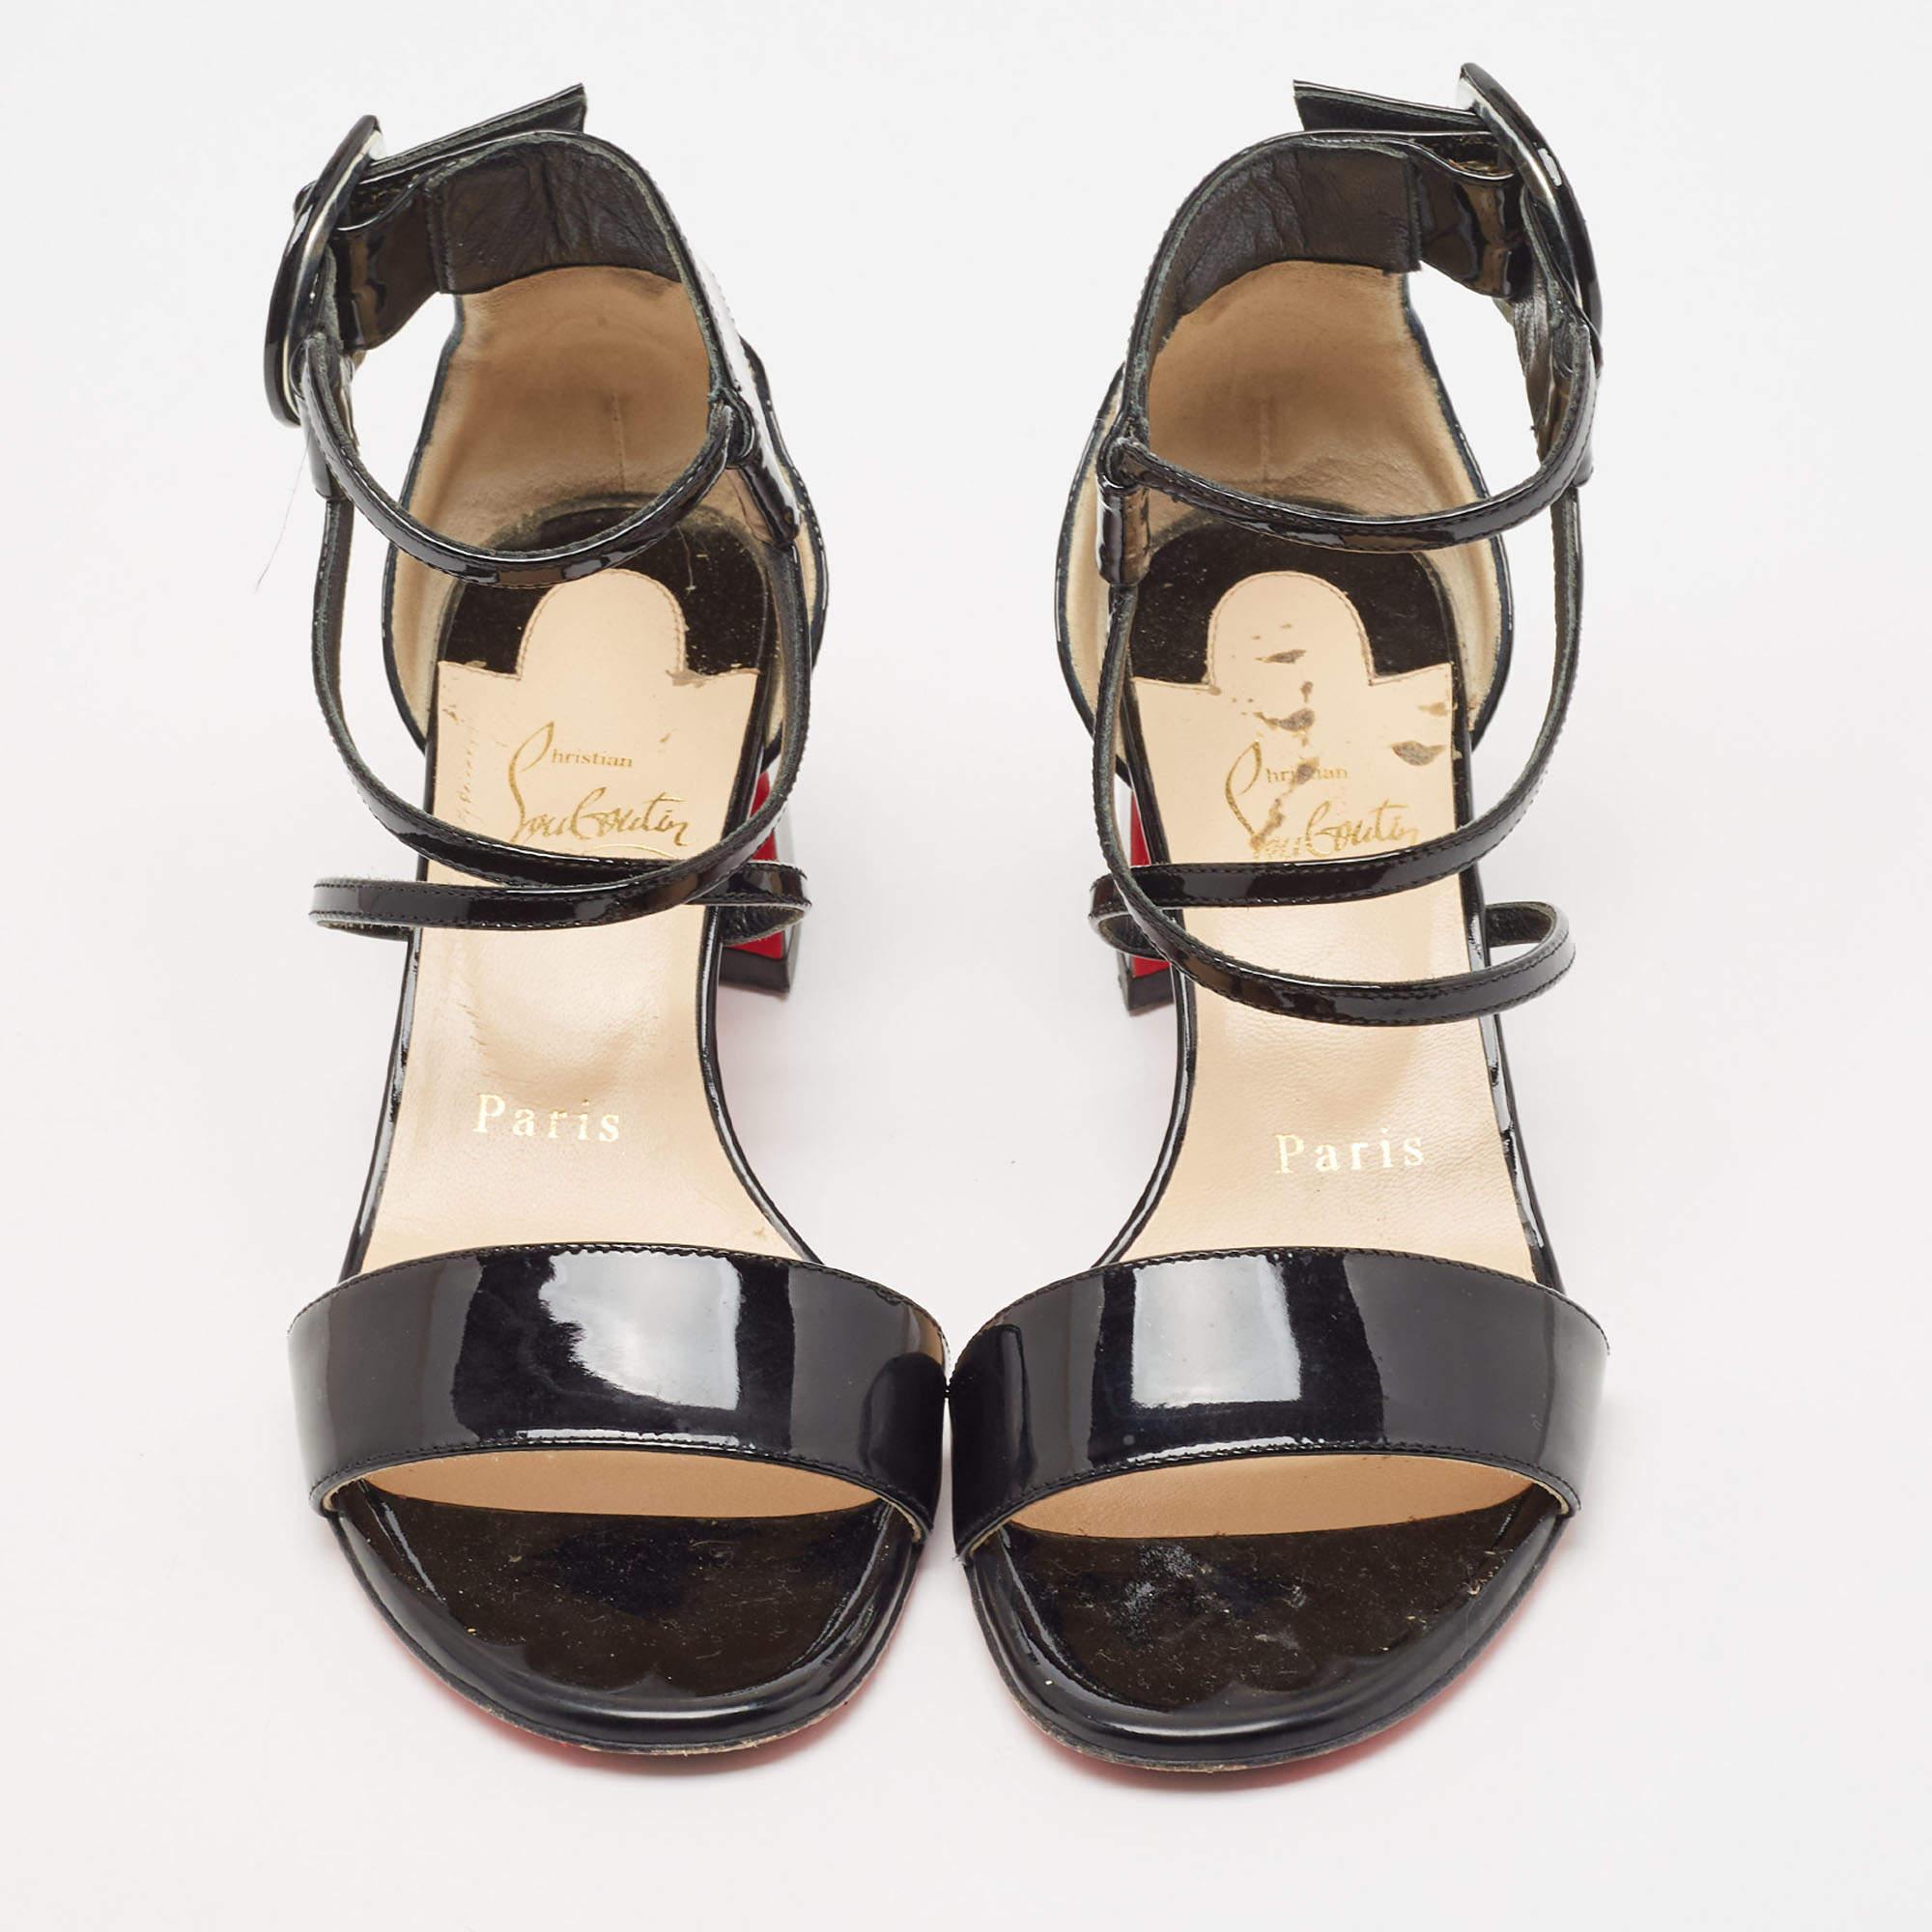 These sandals are chic and constructed with care for a great fit. Crafted from quality materials, they are durable, easy to style, and fabulous, with comfortable interiors, artful designing, and beautiful uppers.

